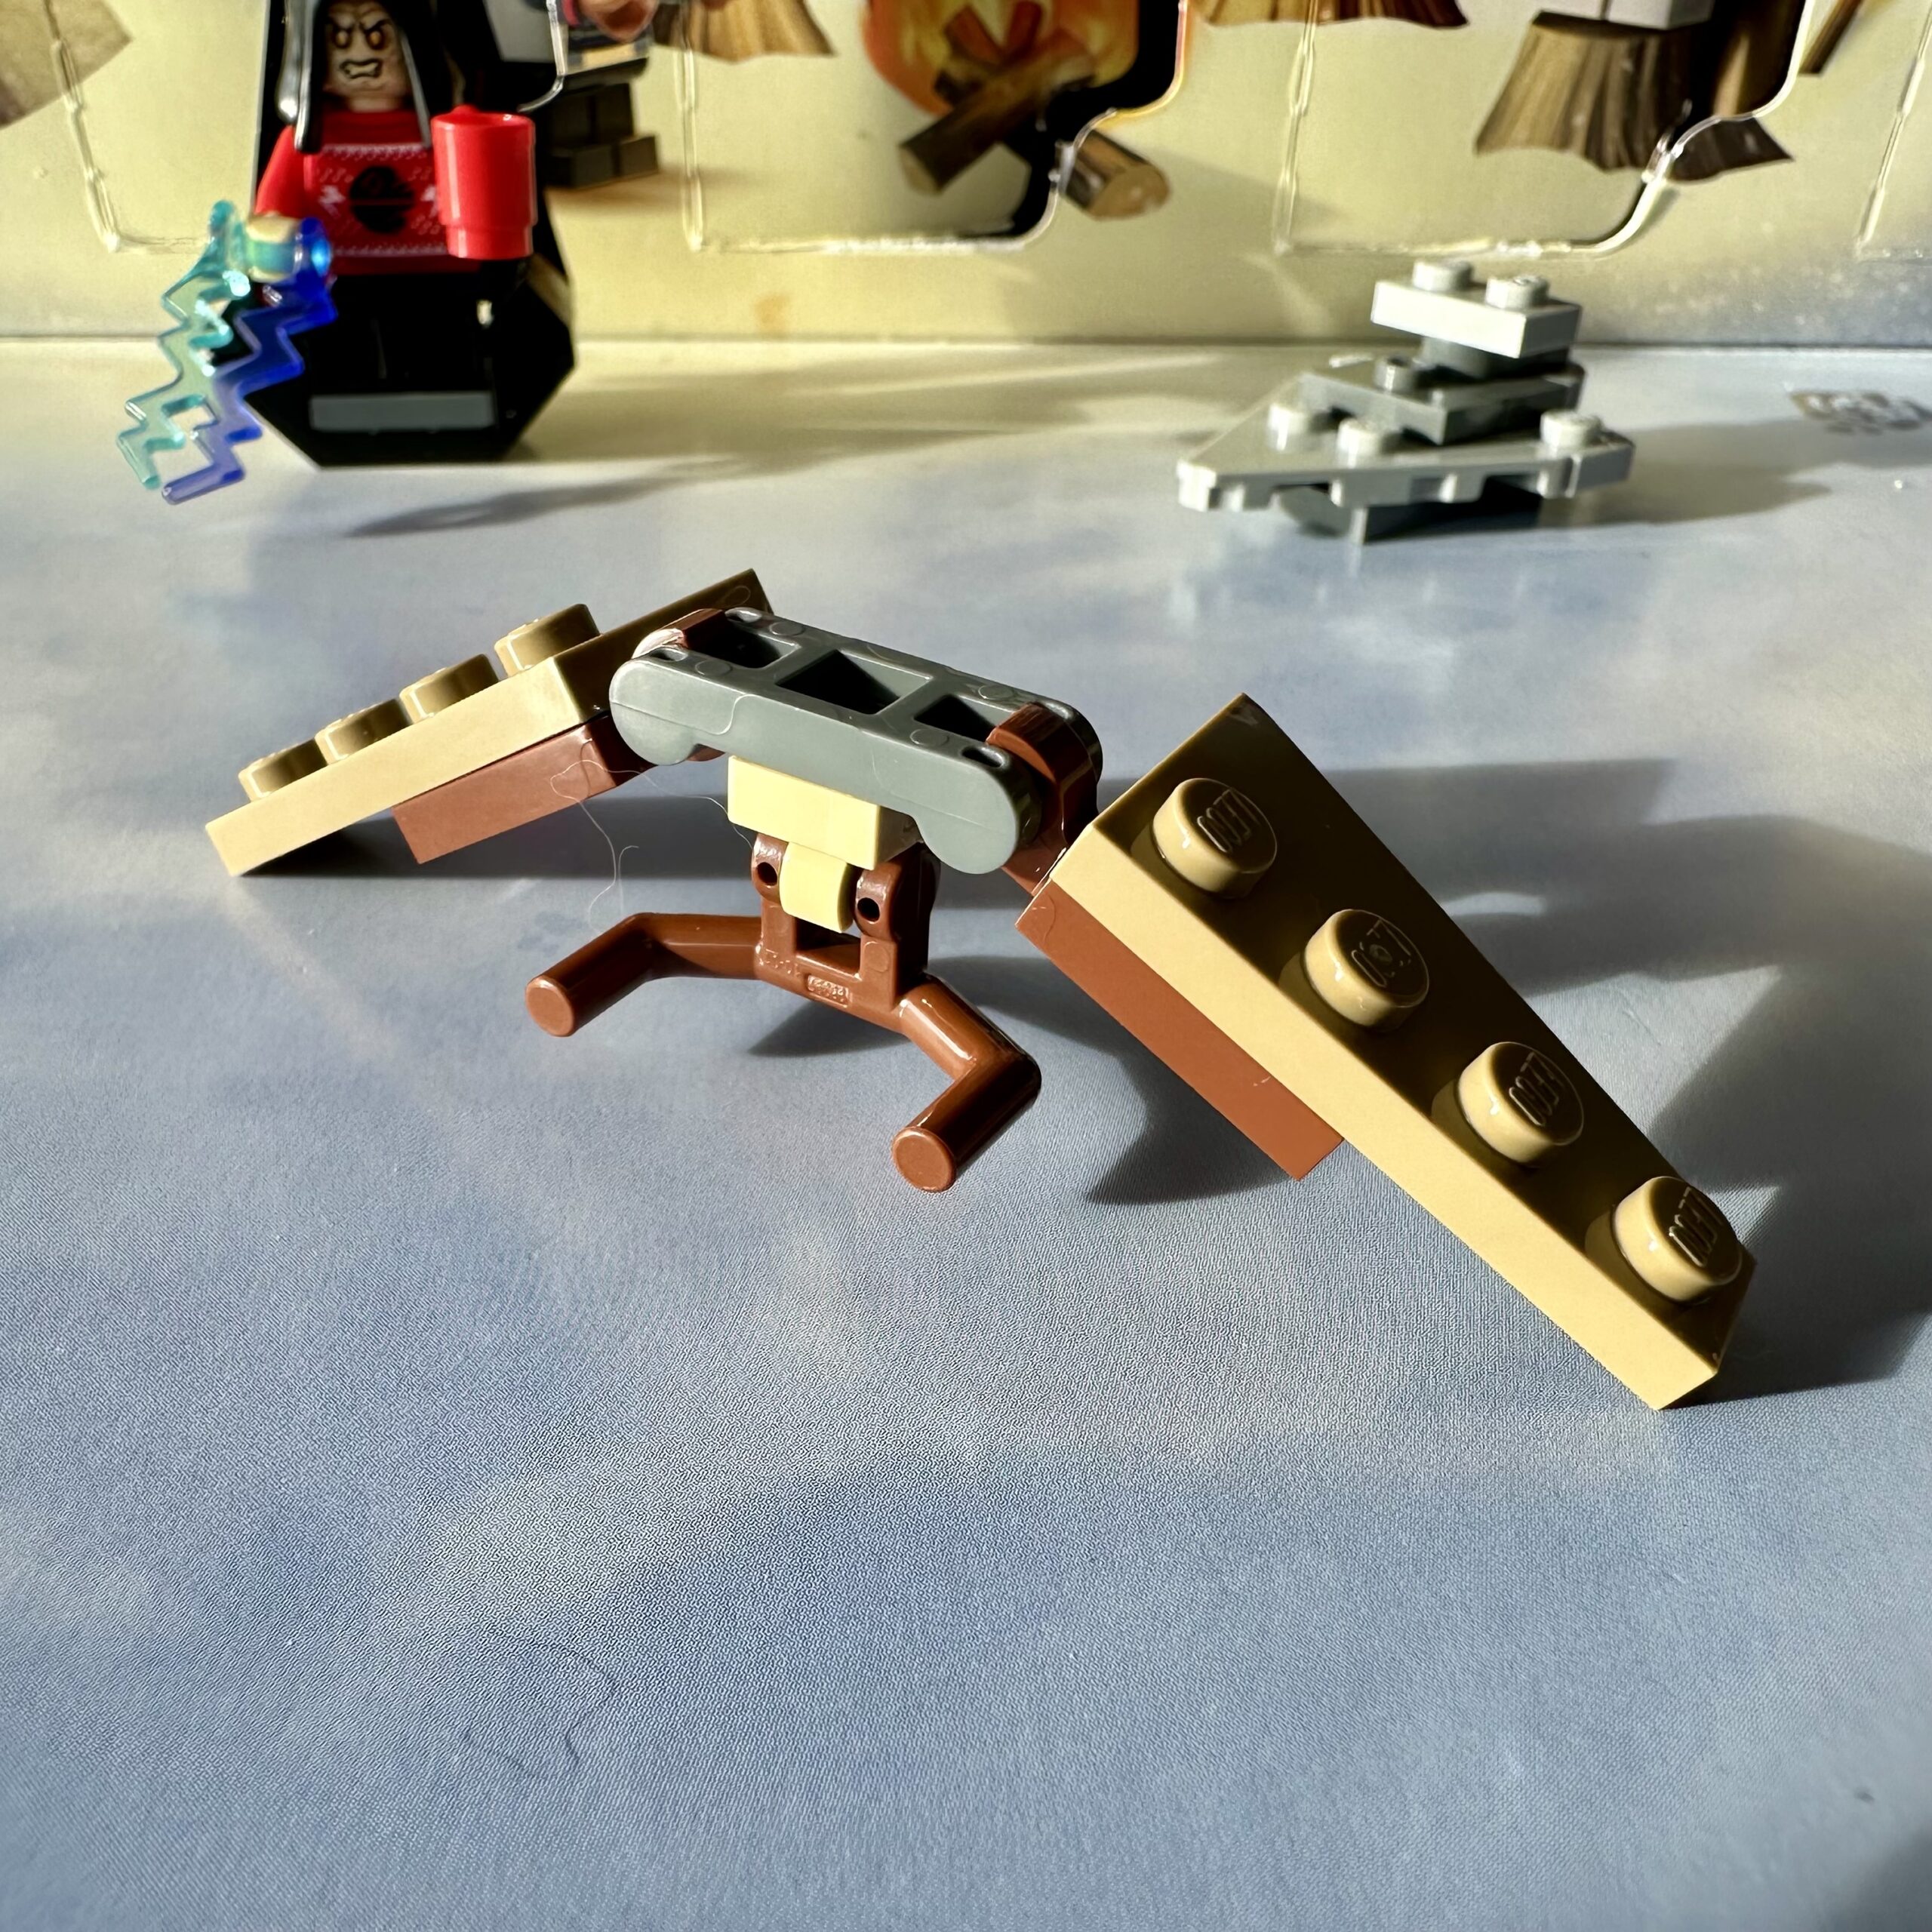 LEGO micro build of an Ewok hang glider made mostly out of brown and tan parts. The results are not good.